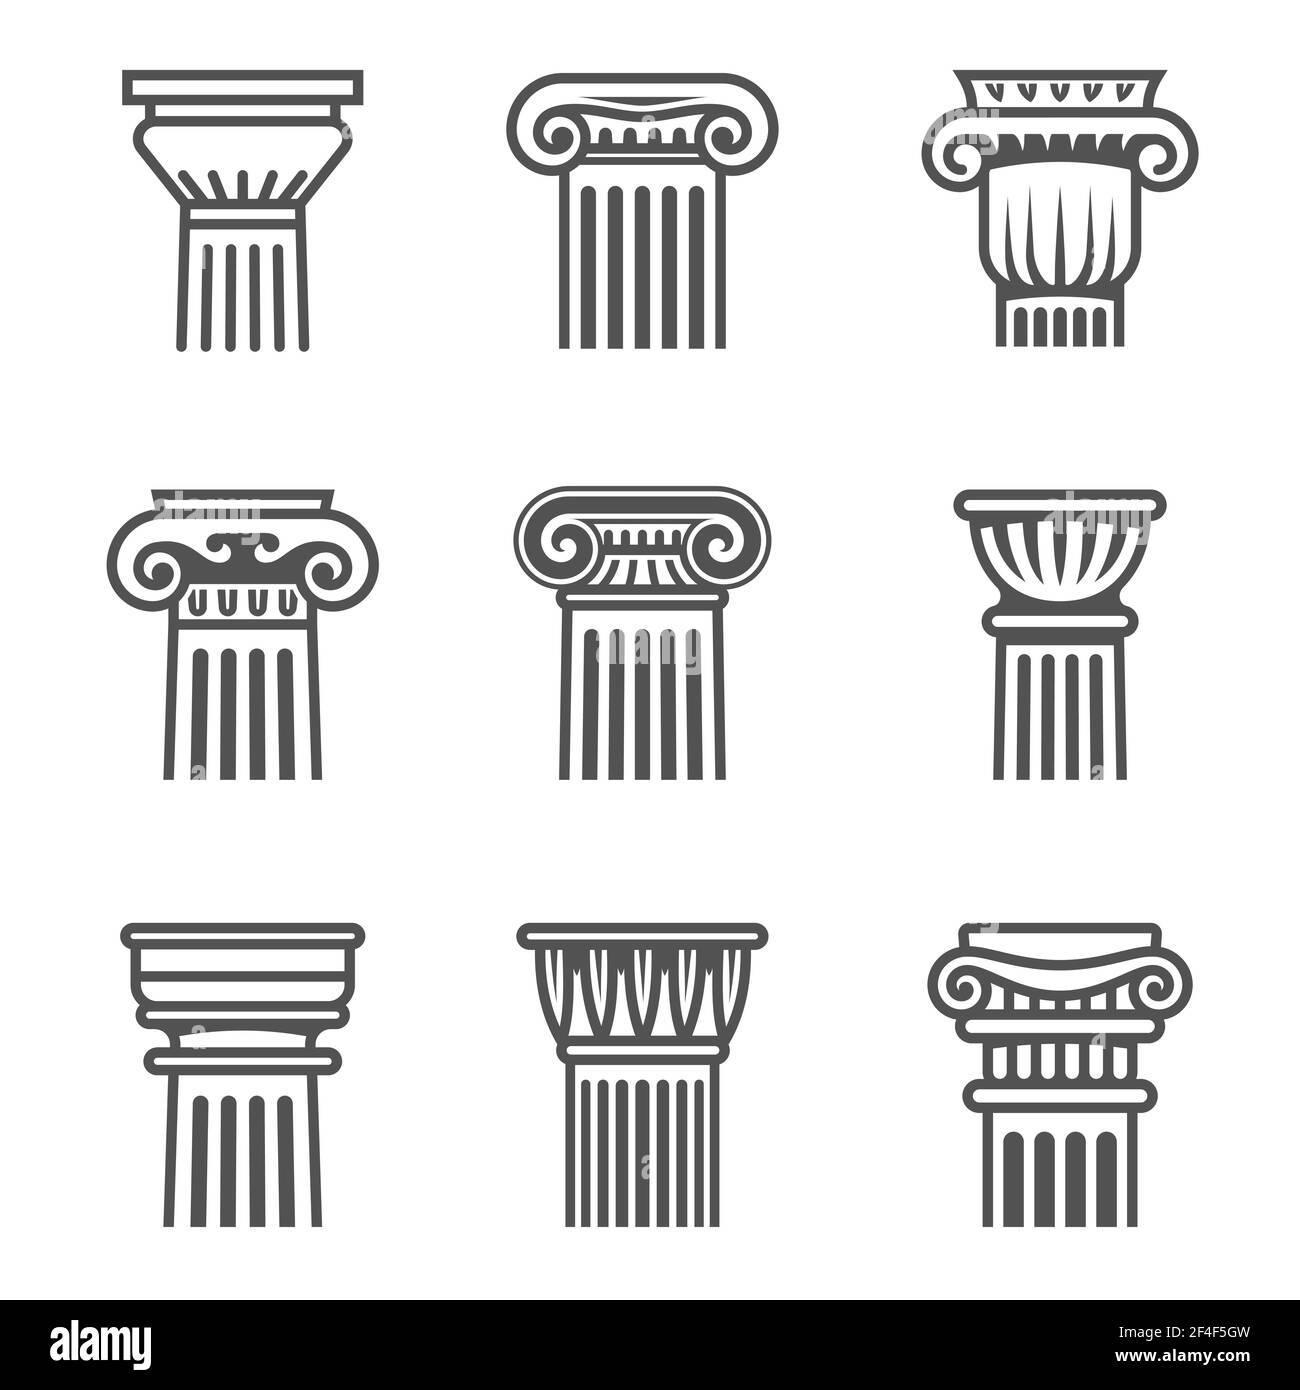 Set of ancient columns icon in black and white colors. Vector illustration Stock Vector